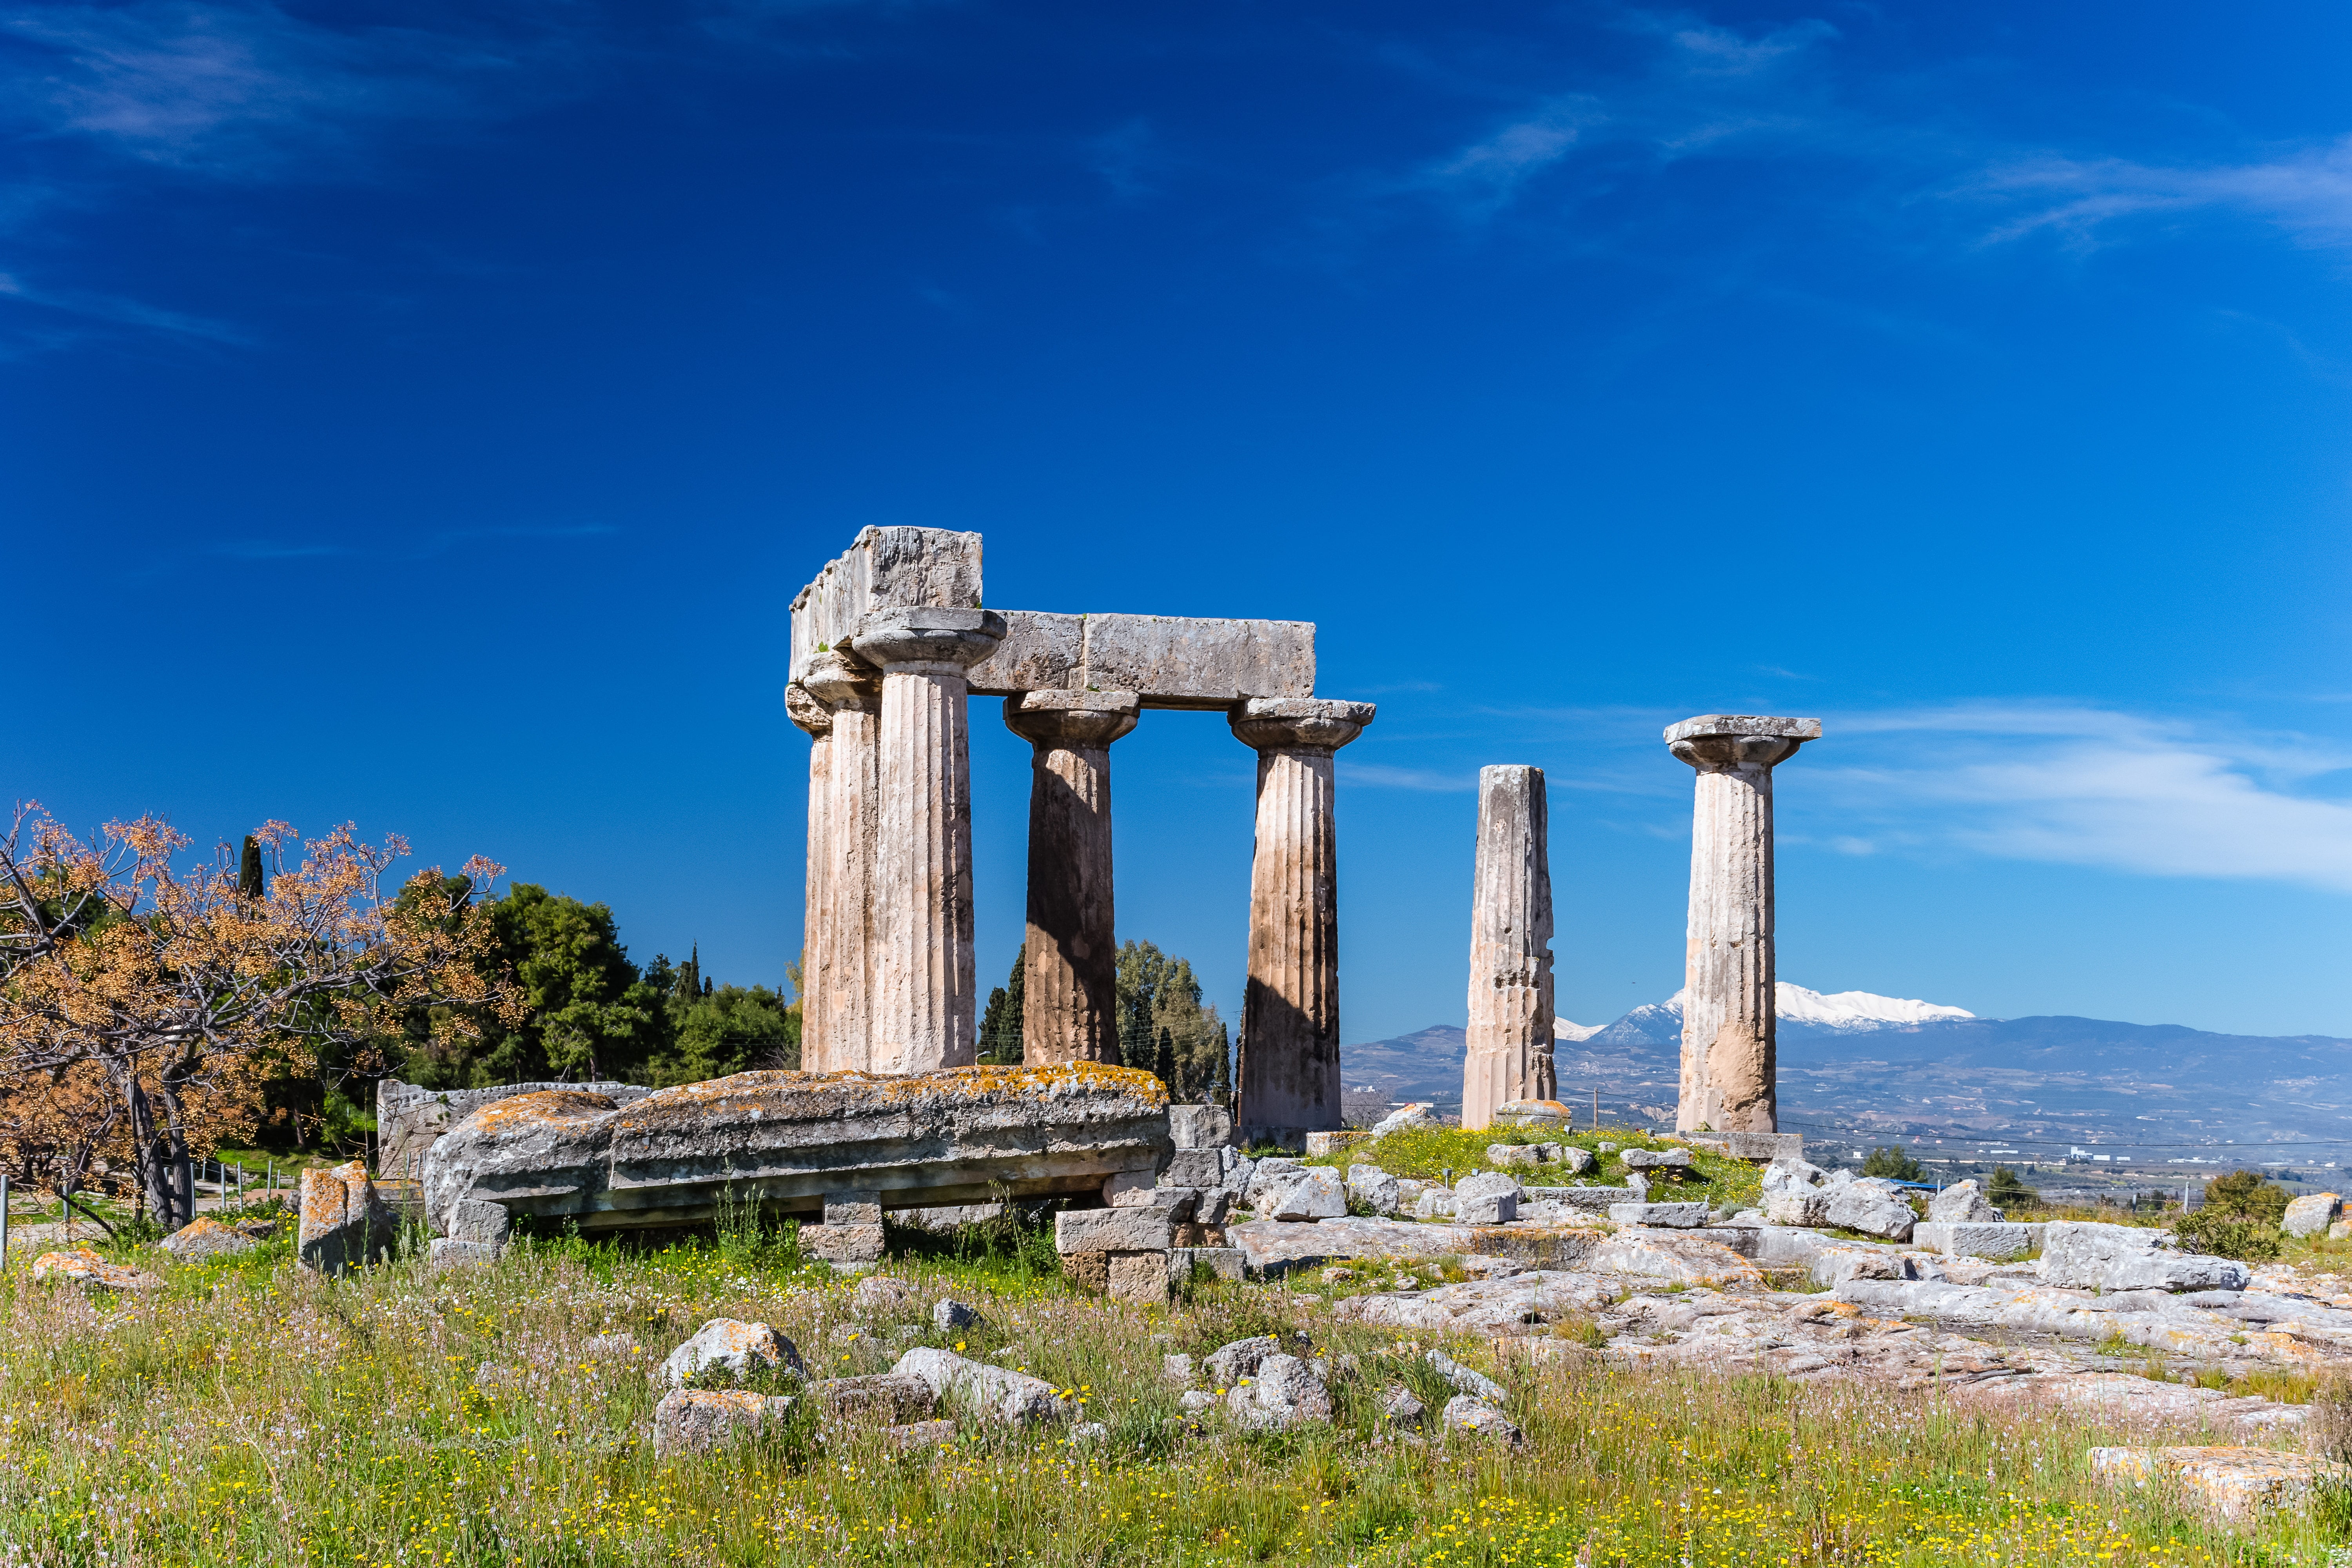 Ruins of Doric Temple of Apollo (6th c. B.C.) in Ancient Corinth, Greece with blue sky background. Ancient Corinth in Greece.